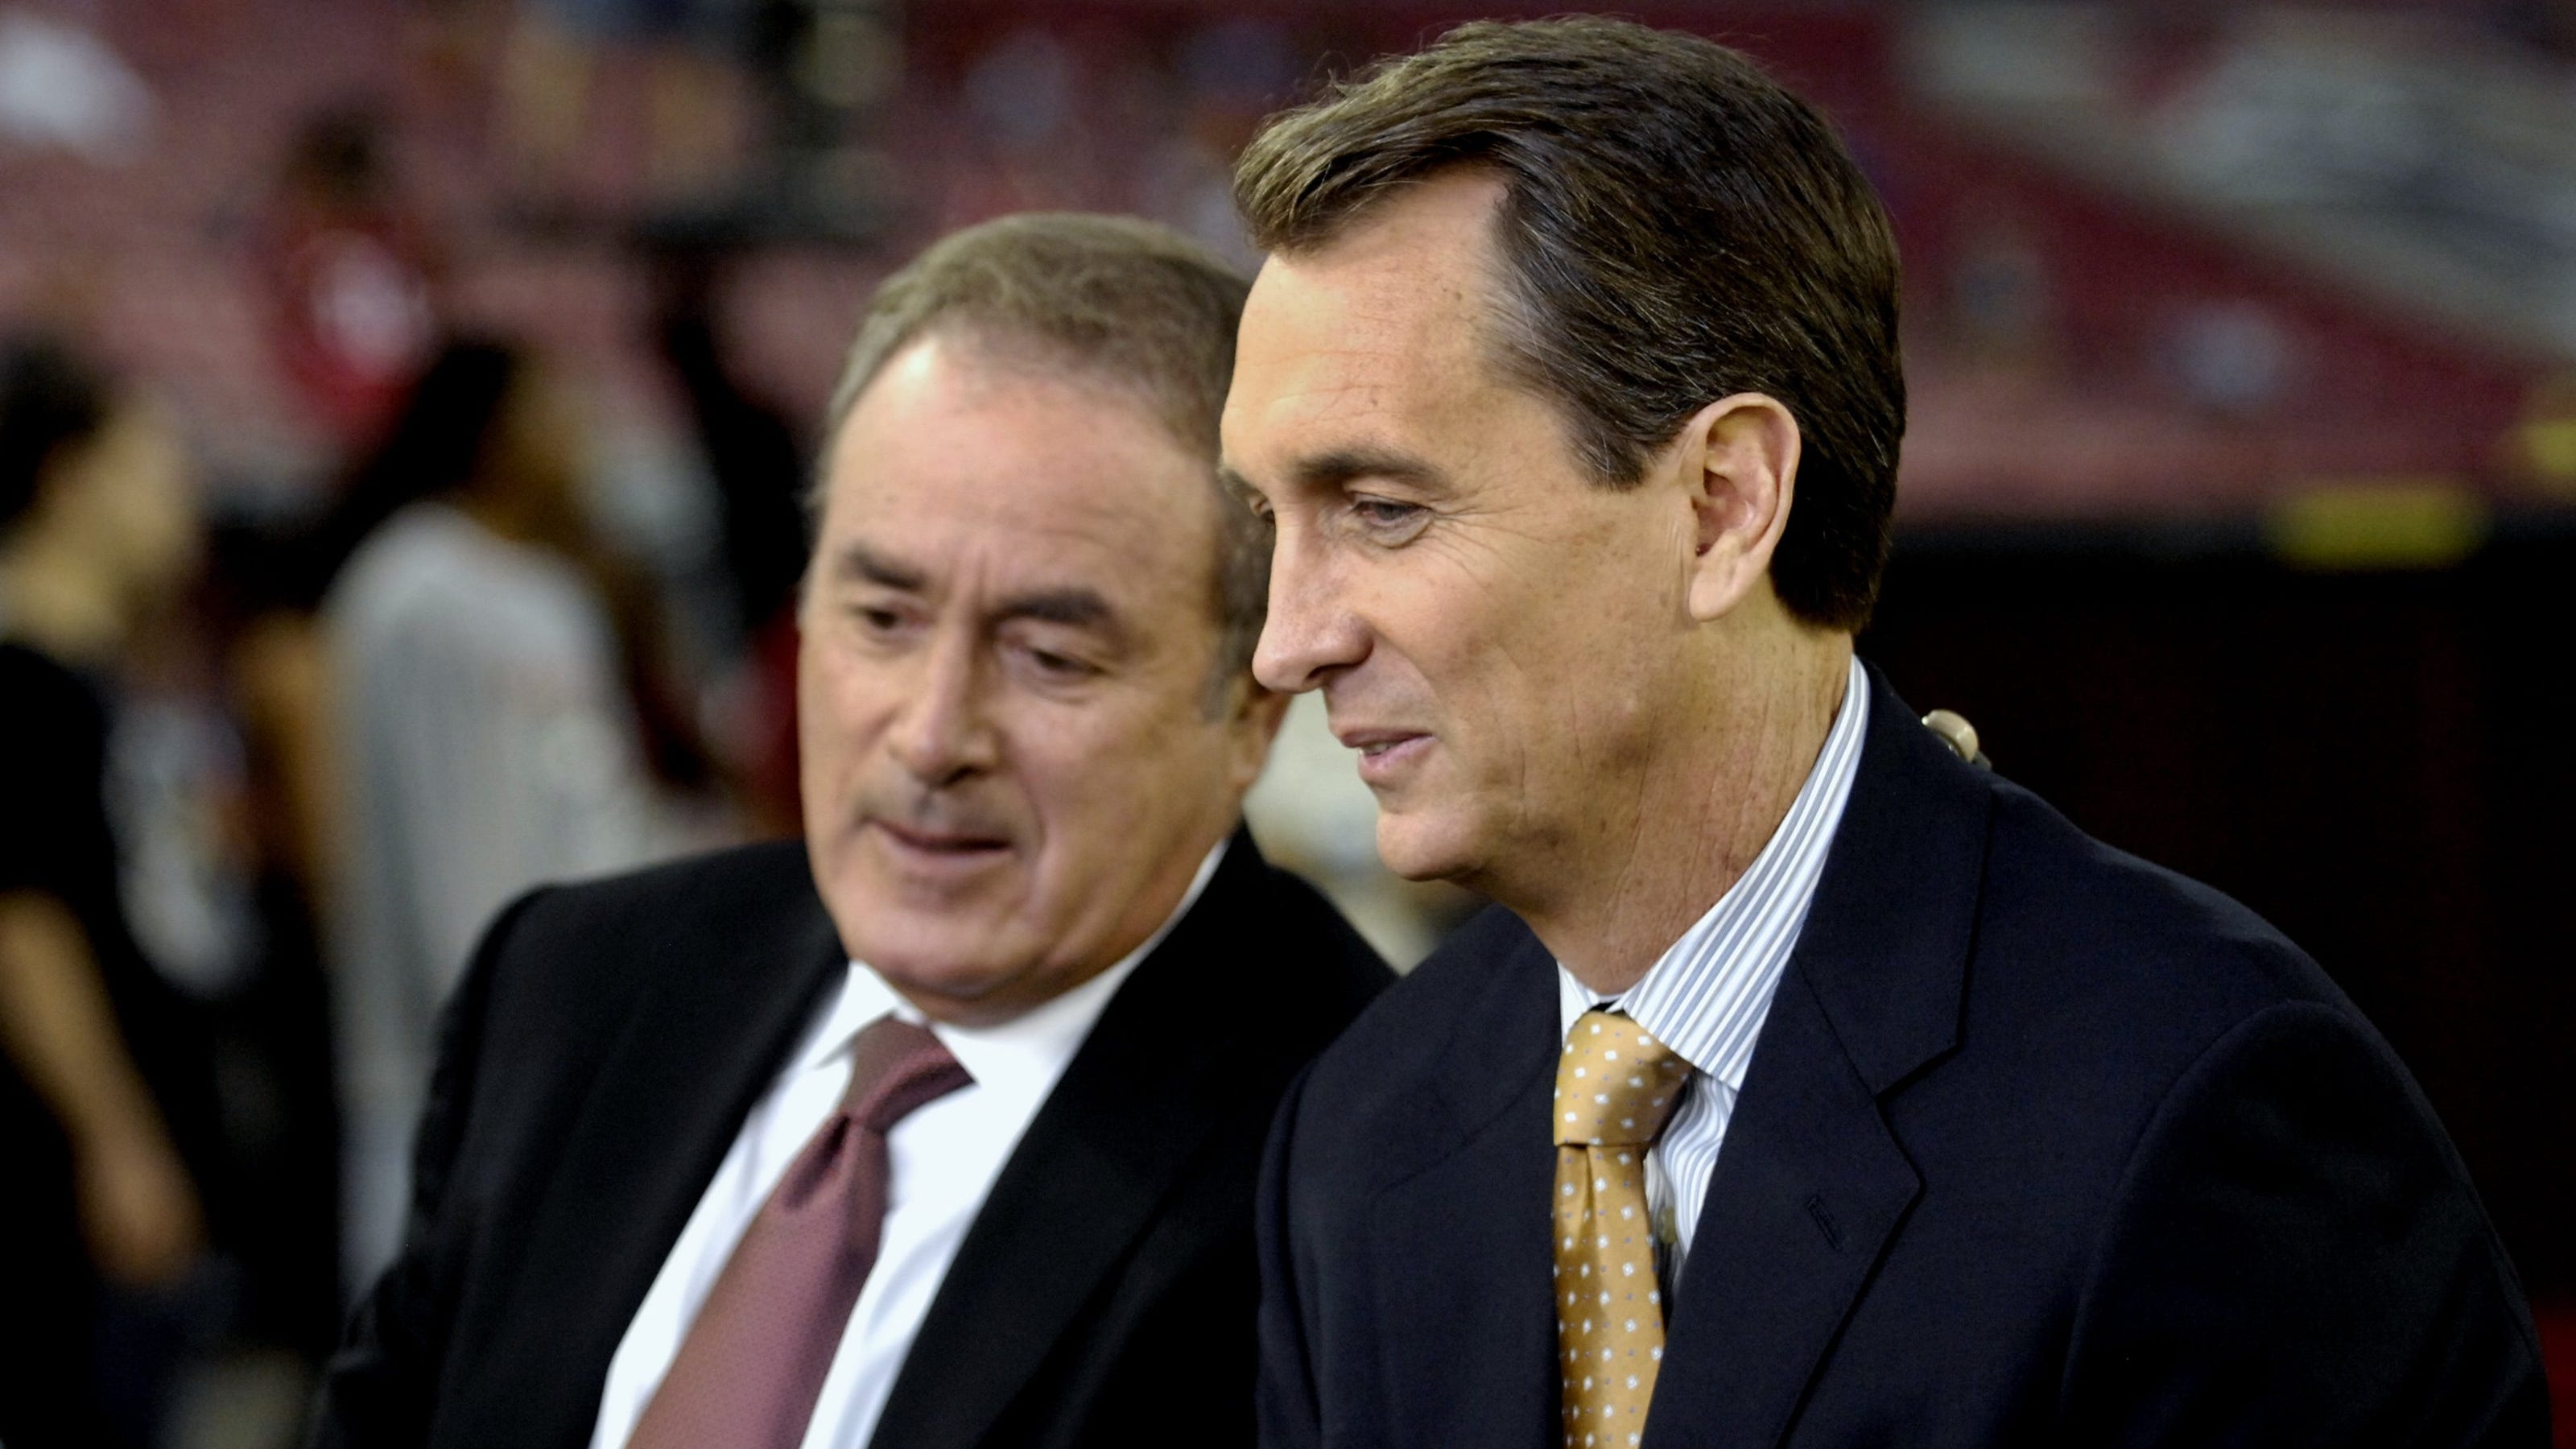 Al Michaels Clowns Cris Collinsworth About His Playing Career During 